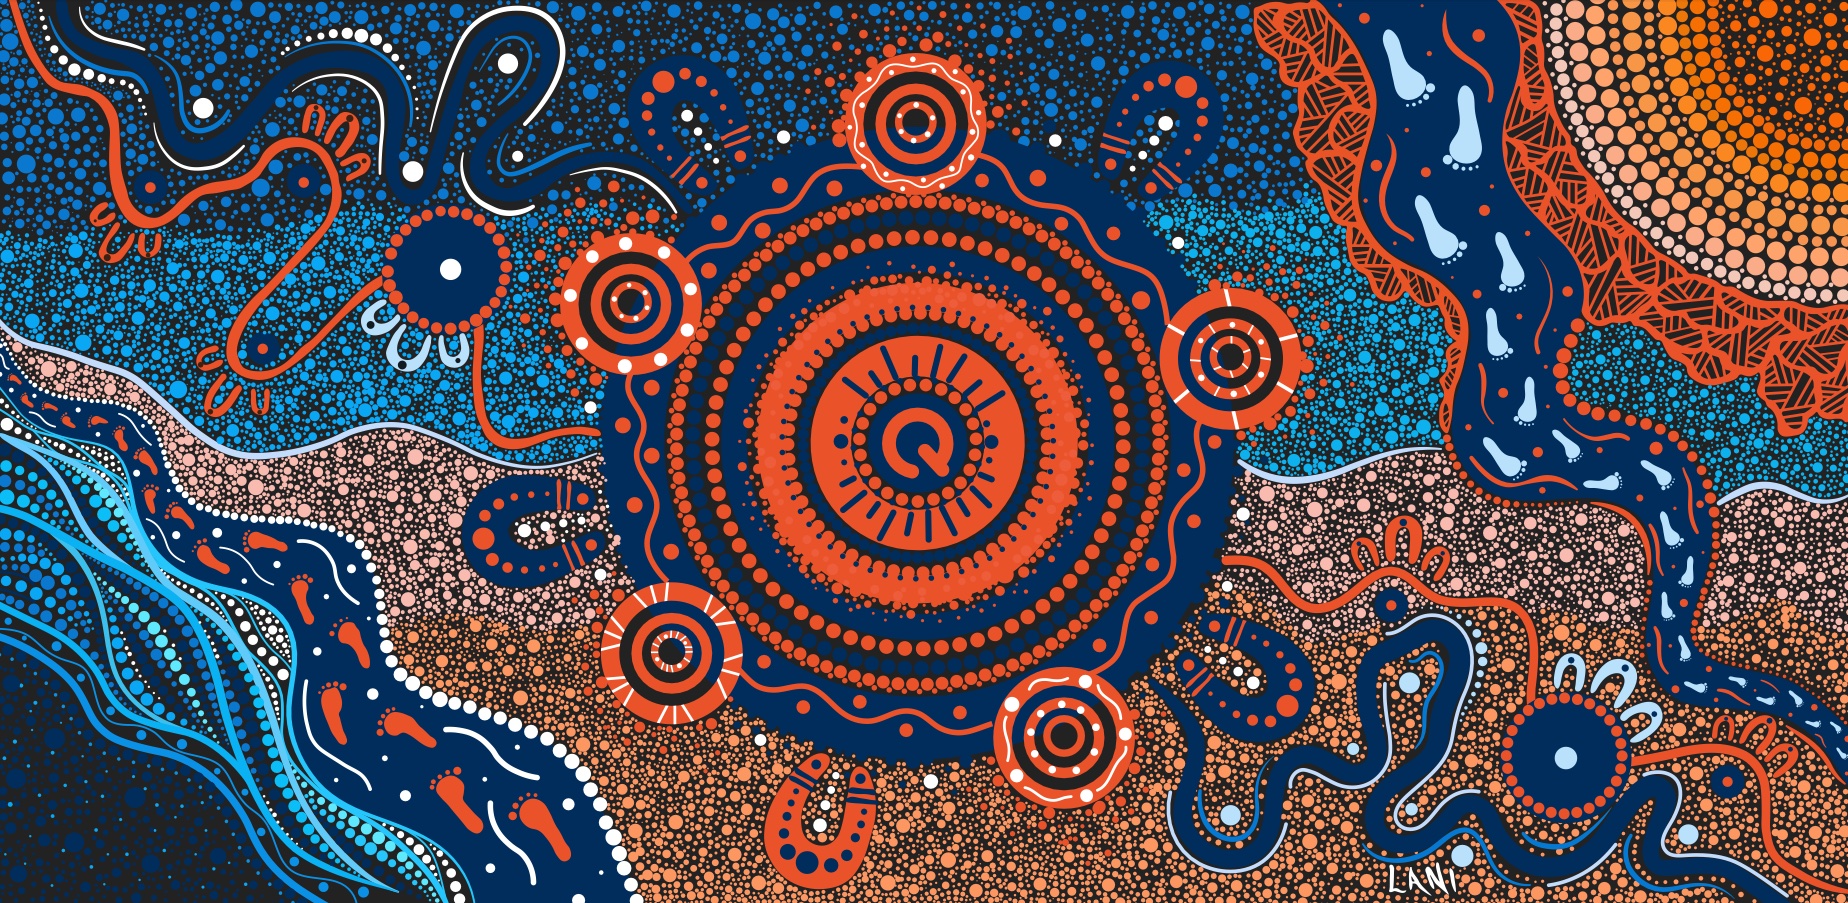 QLeave Innovate Reconciliation Action Plan artwork